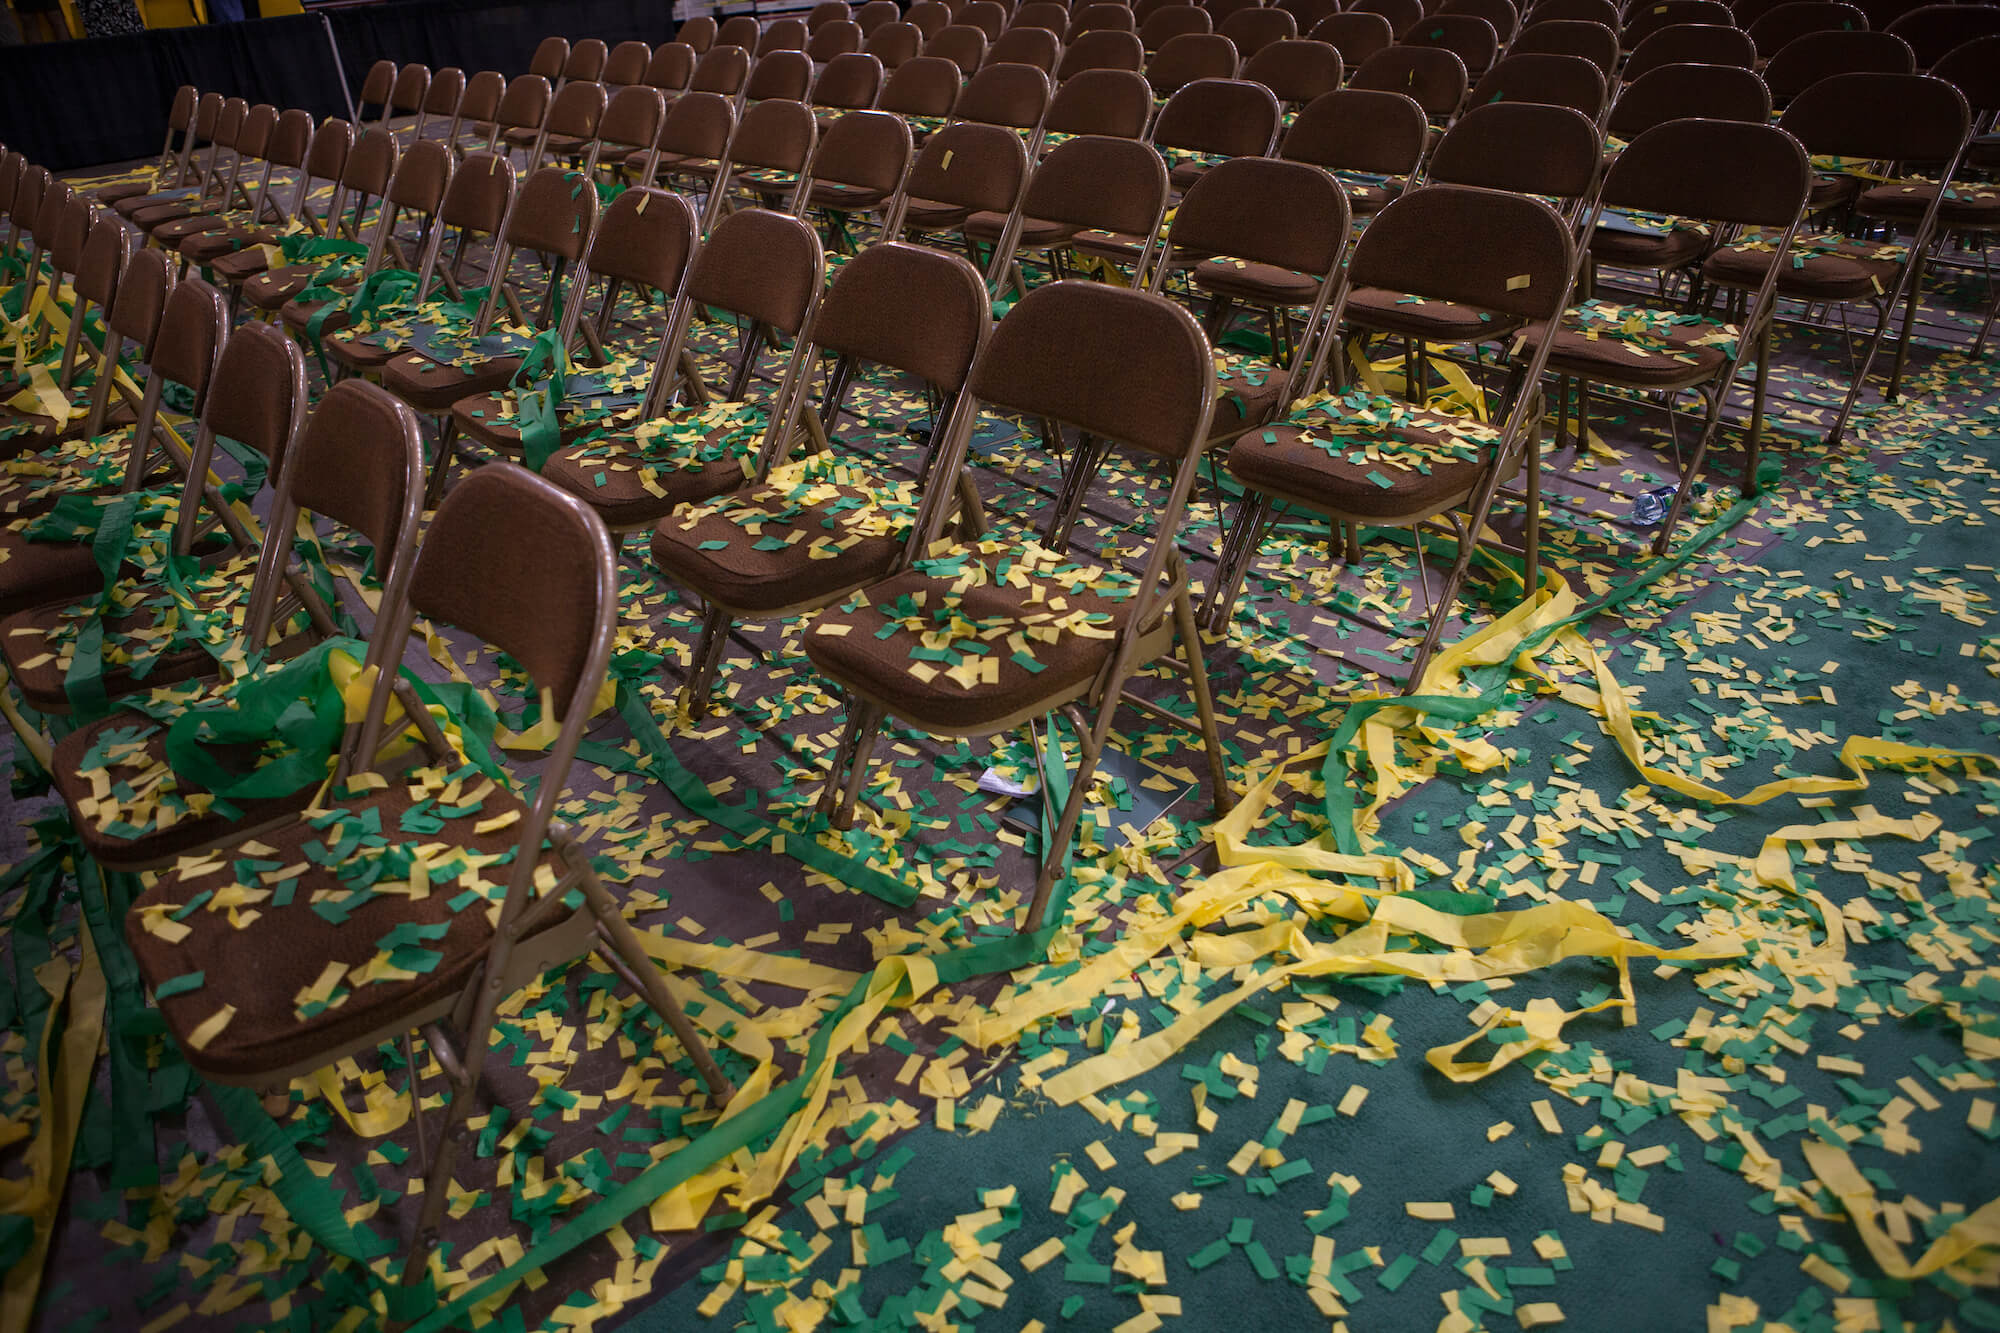 Streamers and confetti lie on the floor of the arena at the end of the 2014 University of Alaska Anchorage Commencement Ceremony at the George M. Sullivan Arena in Anchorage, Alaska Sunday, May 4, 2014. 